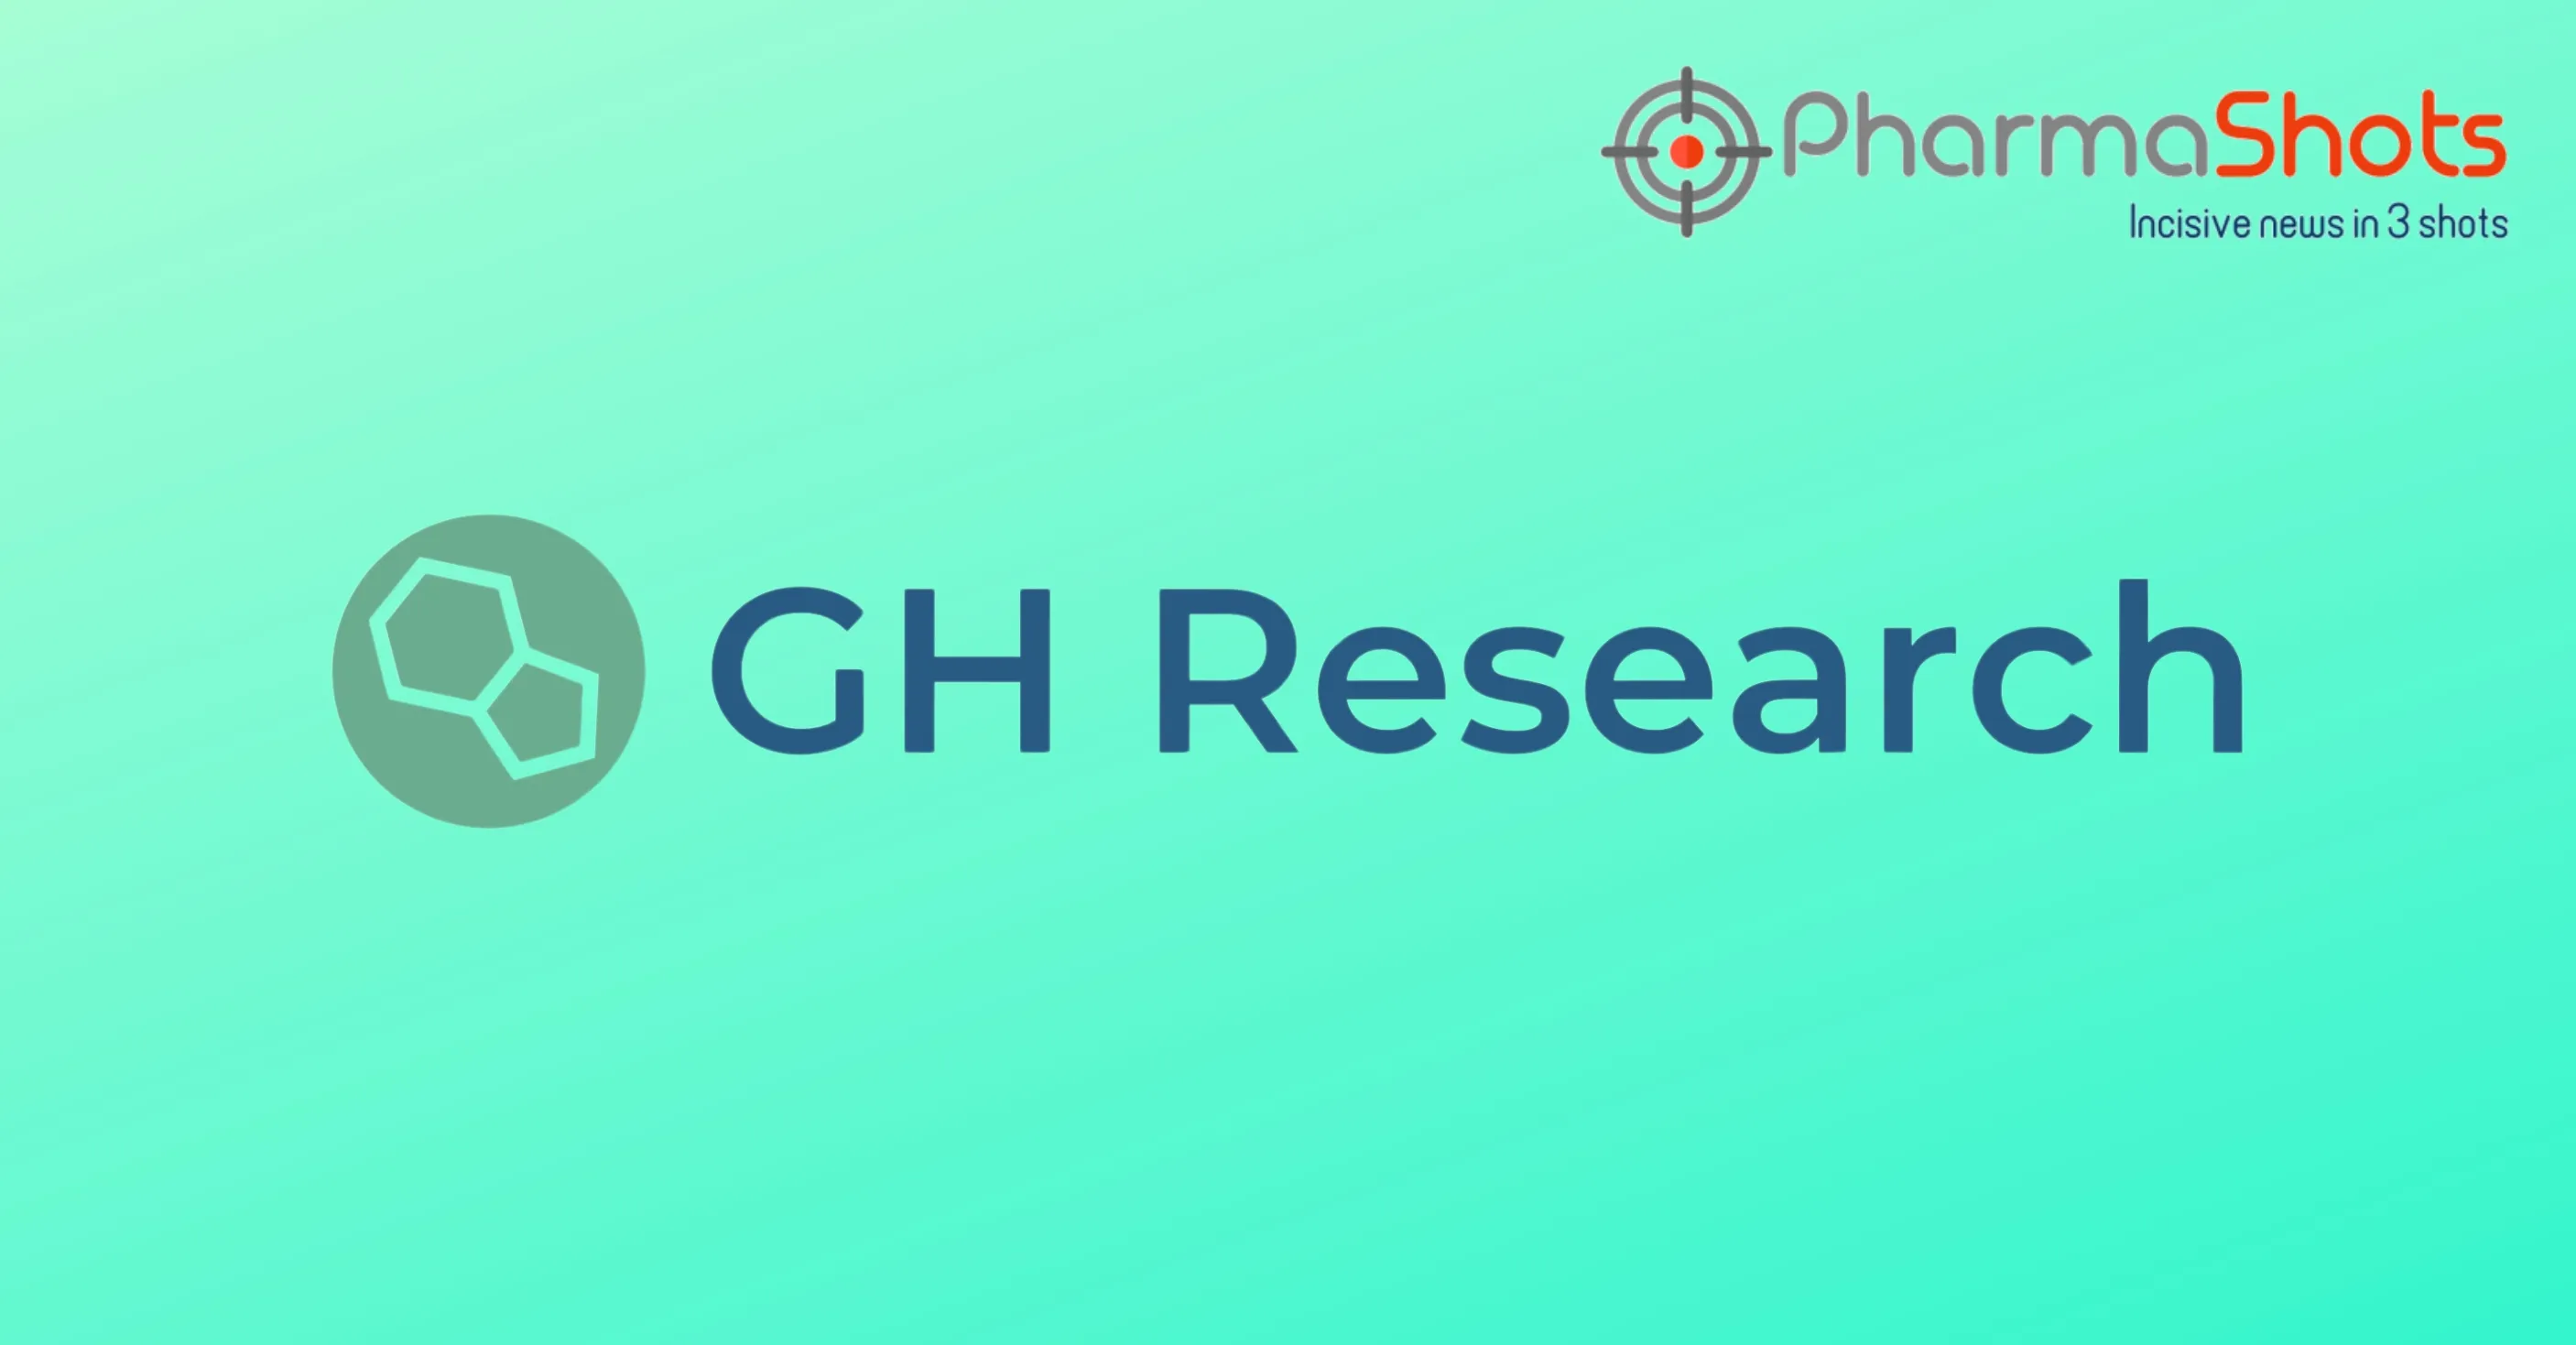 GH Research’s Mebufotenin (5-MeO-DMT) and its Salt Products Receive European Patent for Major Depressive Disorder and Treatment-Resistant Depression